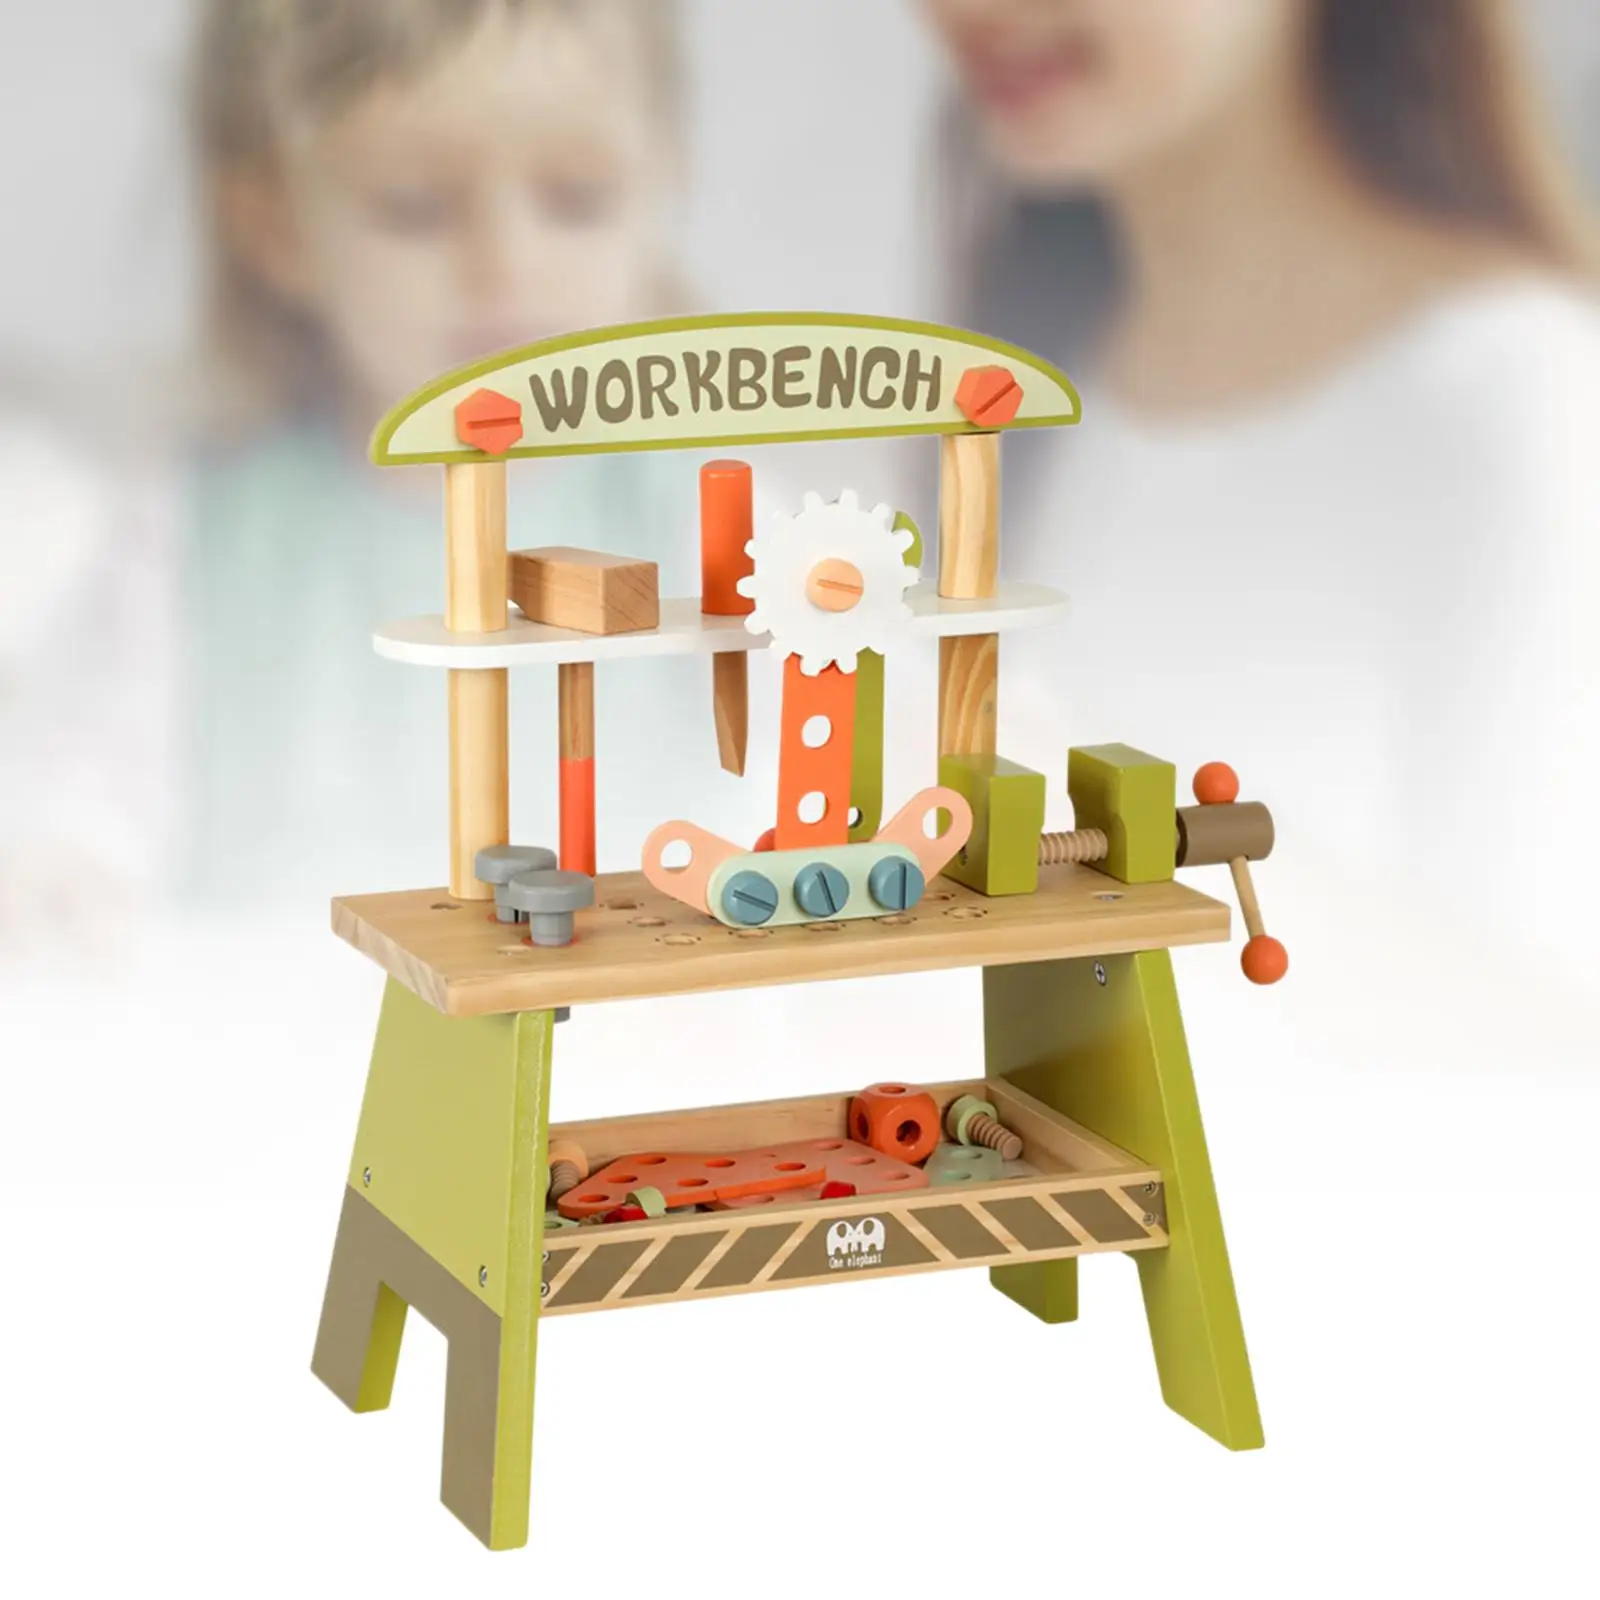 Small Wooden Kid Workbench Toy DIY Children Repair Play Tool Set for Christmas Gifts Child Ages 3+ Holiday Present Girls Boys